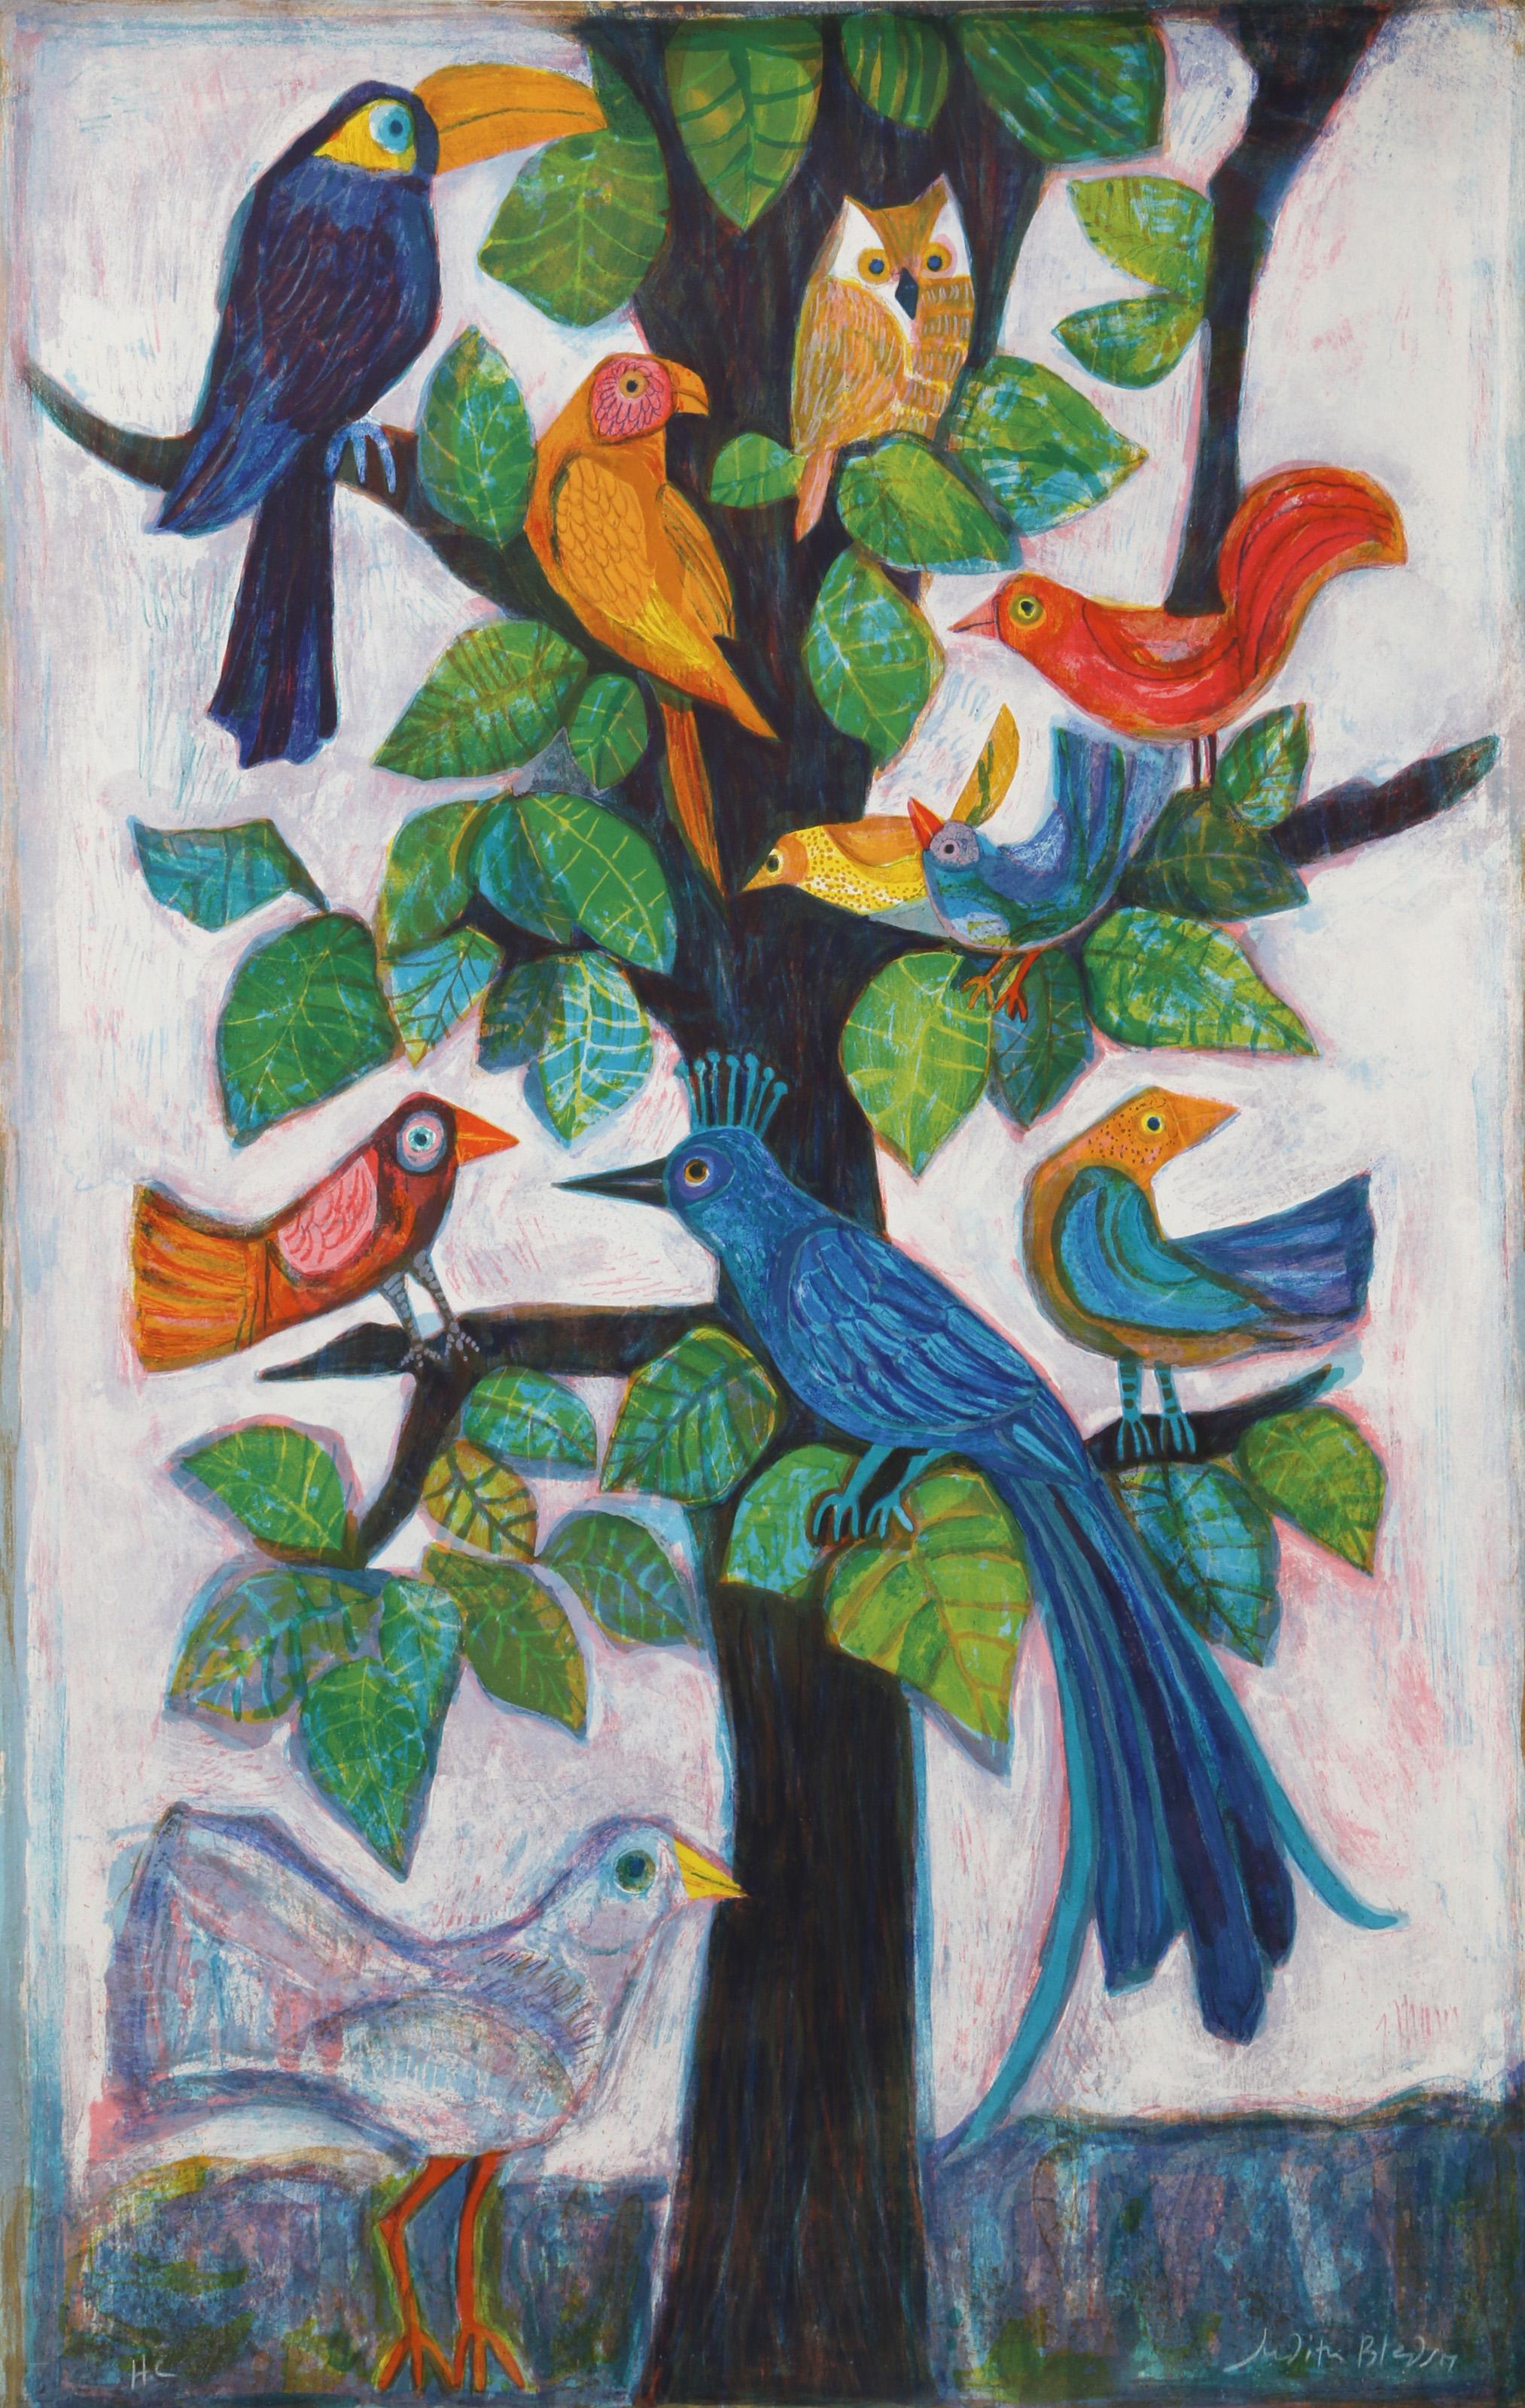 Judith Bledsoe, American (1938 - 2013) -  Various Birds in Tree. Year: circa 1980, Medium: Lithograph, signed in pencil, Edition: HC, Size: 34.5  x 22.5 in. (87.63  x 57.15 cm), Description: Perched throughout the tree, Judith Bledsoe's birds